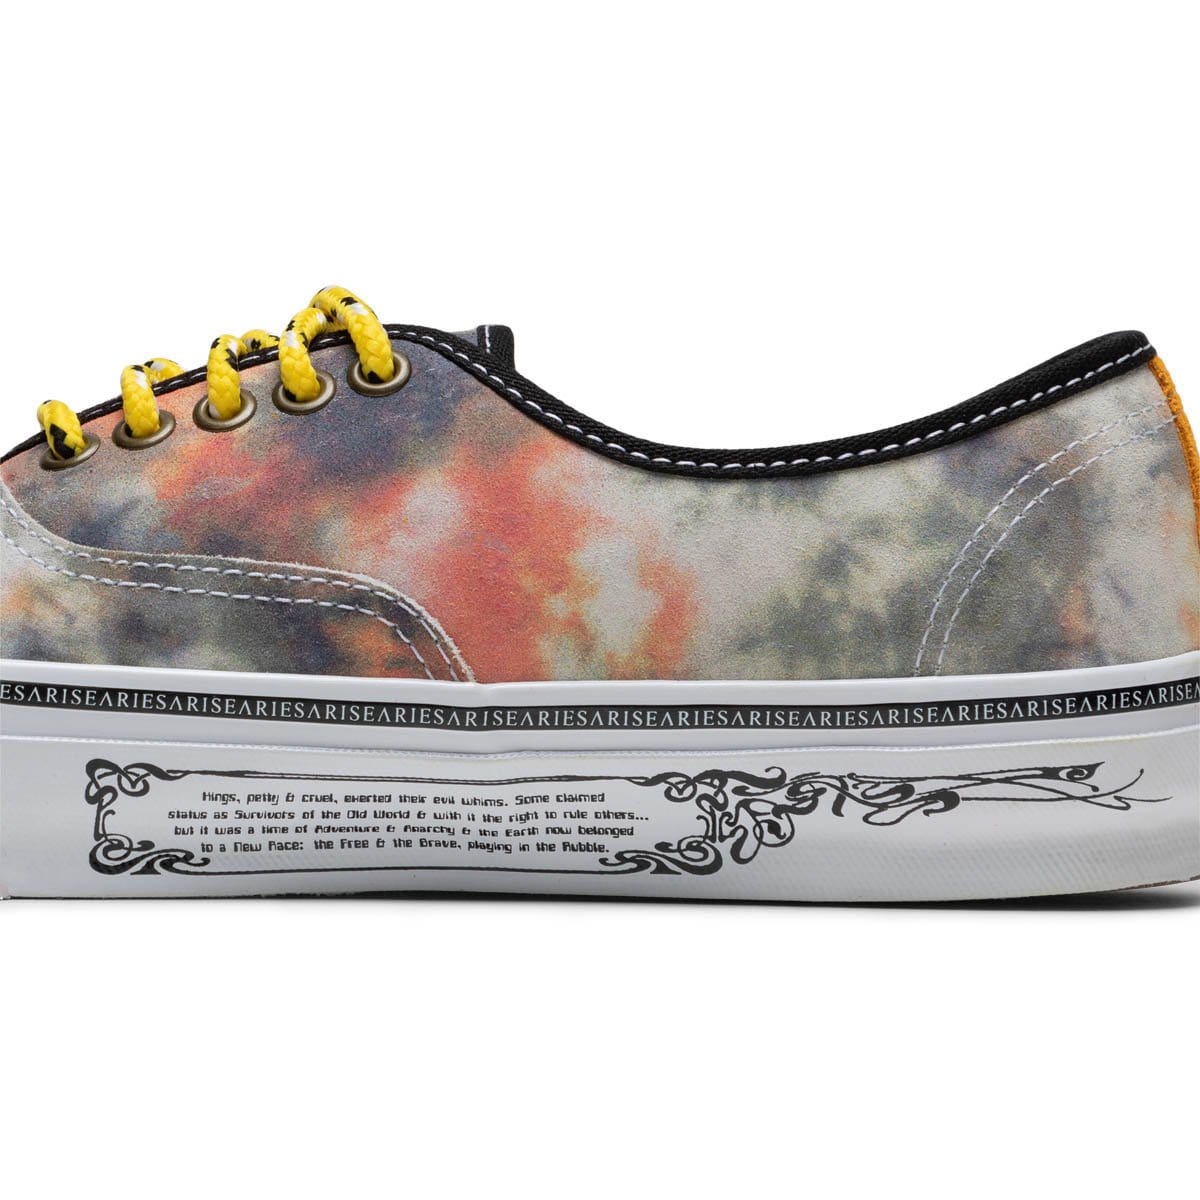 Vault by Vans Casual x Aries OG AUTHENTIC LX